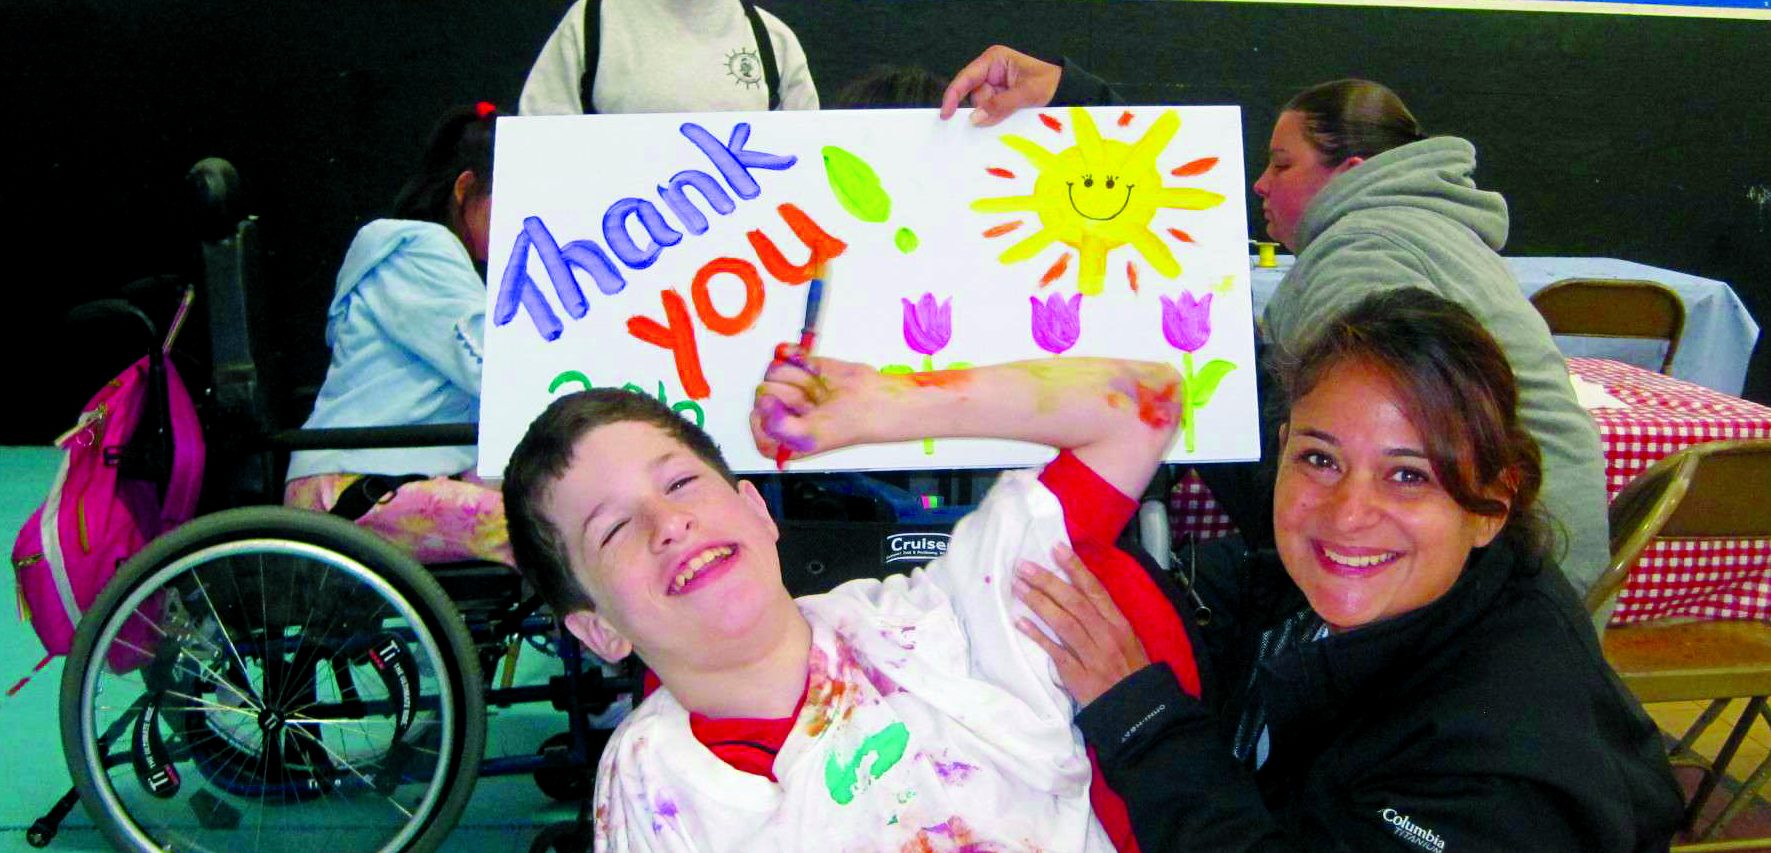 A happy camper wearing a white t-shirt splattered with pain holds a paint brush, while a counselor holds up a painted "thank you" poster with the sun and flowers.